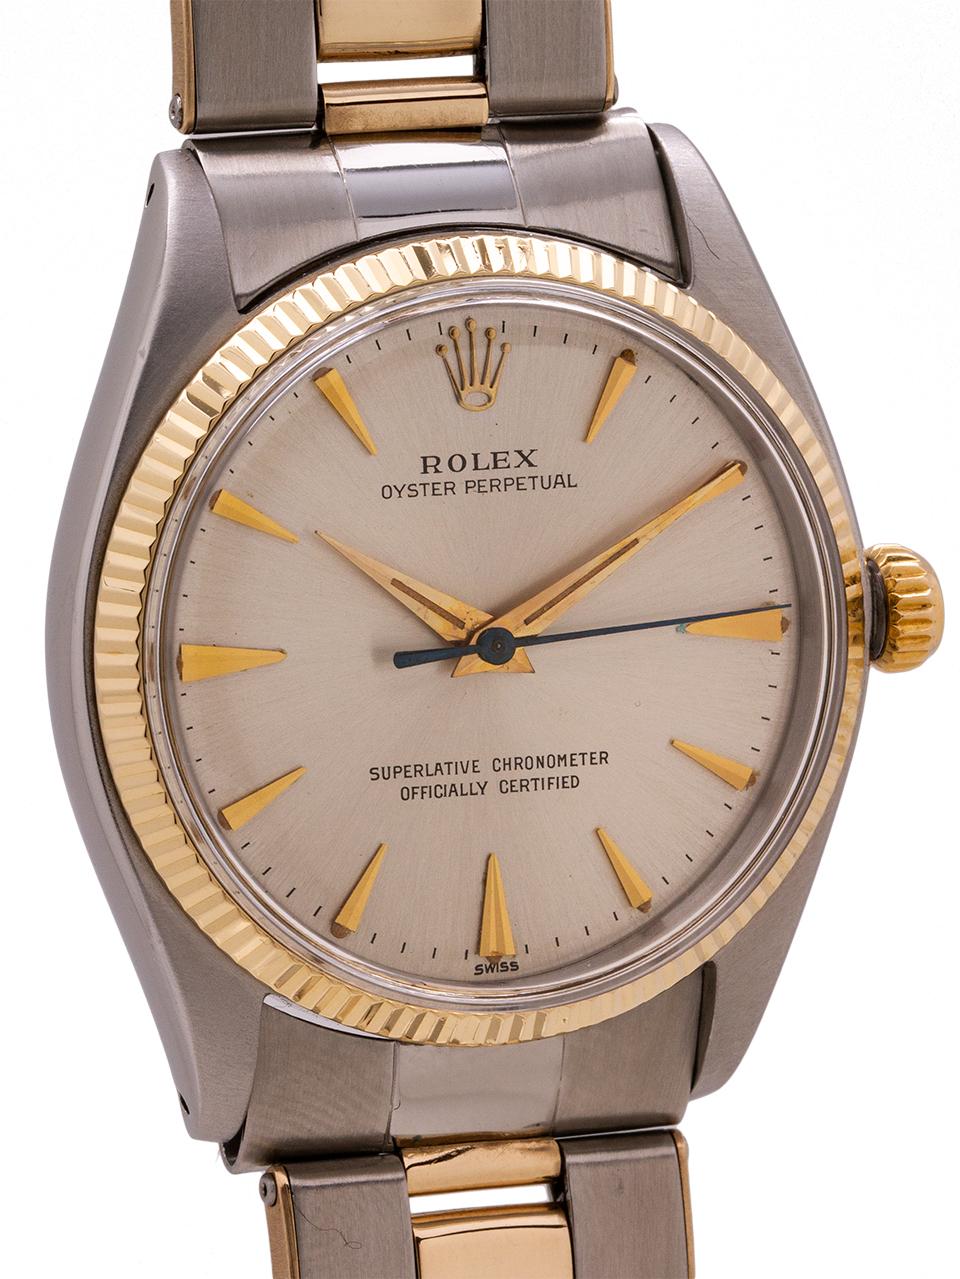 
Rolex Stainless Steel and 14K yellow gold Oyster Perpetual ref 1005 serial #665,xxx circa 1961. Featuring 34mm diameter case with fine engine turned “milled” bezel and acrylic crystal. With original silver satin dial with applied gold indexes and